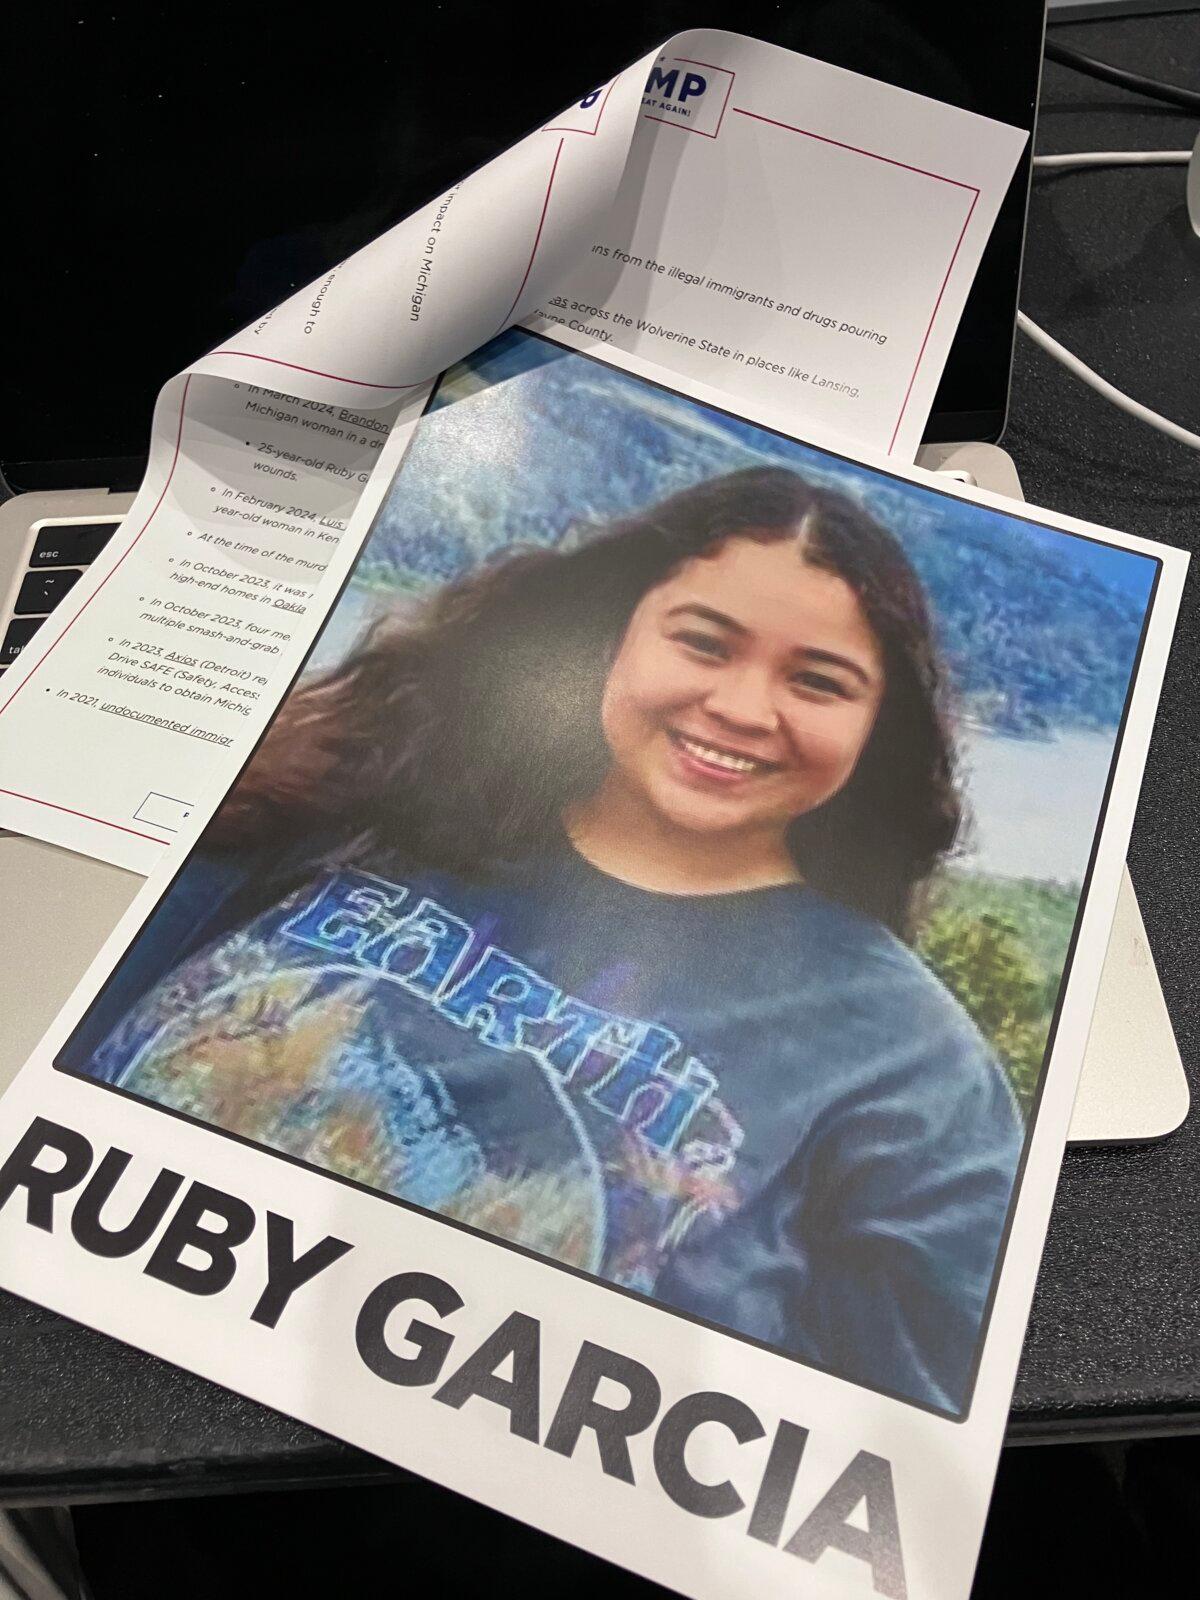 A handout from former President Donald Trump's campaign displayed a photograph of Ruby Garcia, 25, of Grand Rapids, Mich., as an example of a killing allegedly committed by an illegal immigrant, at a speech in Grand Rapids on April 2, 2024. (Janice Hisle/The Epoch Times)